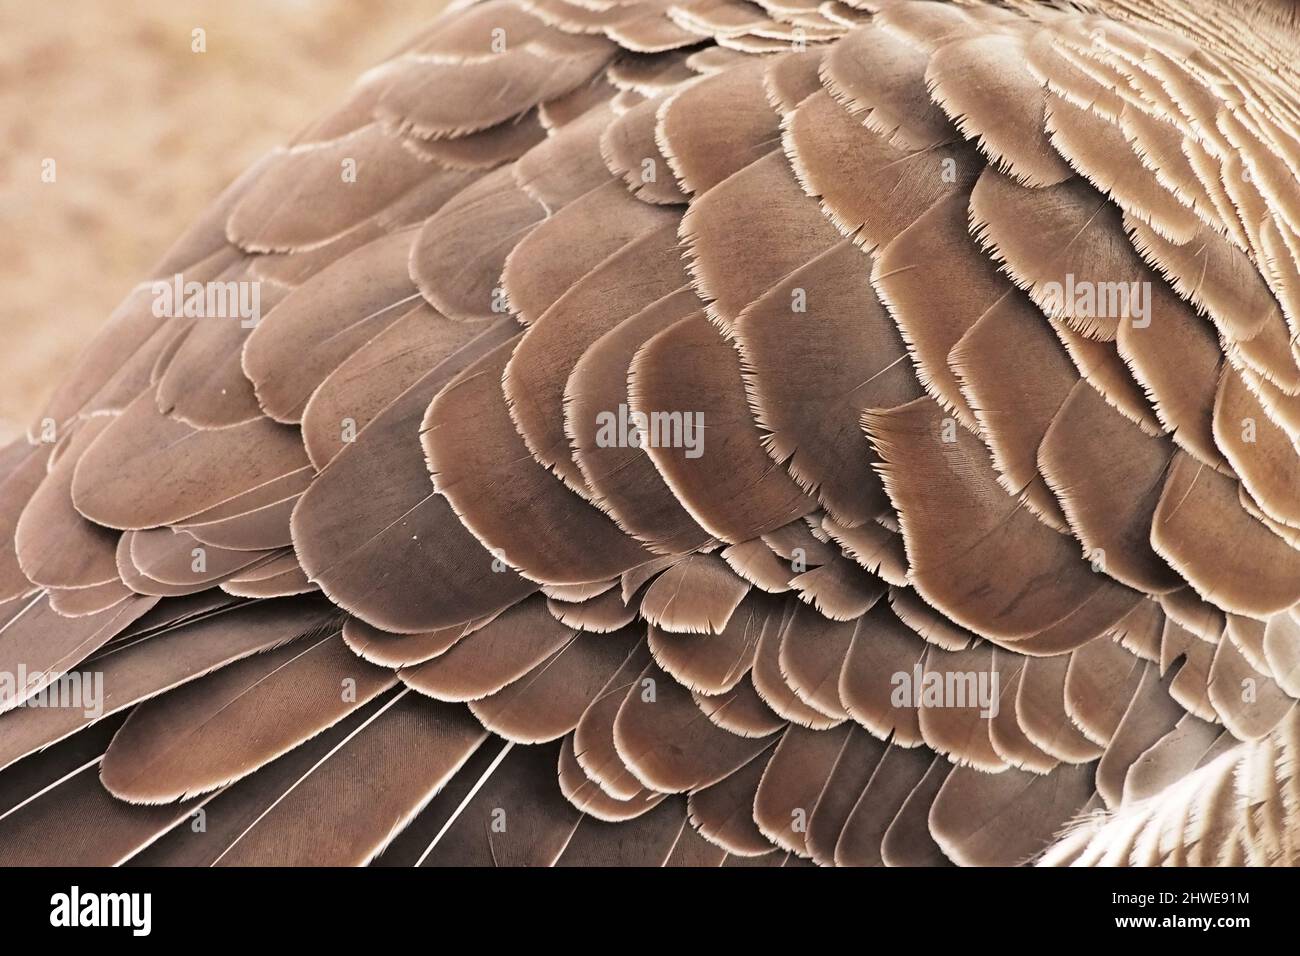 A close up of the back of a Canada goose showing the pattern of feathers Stock Photo